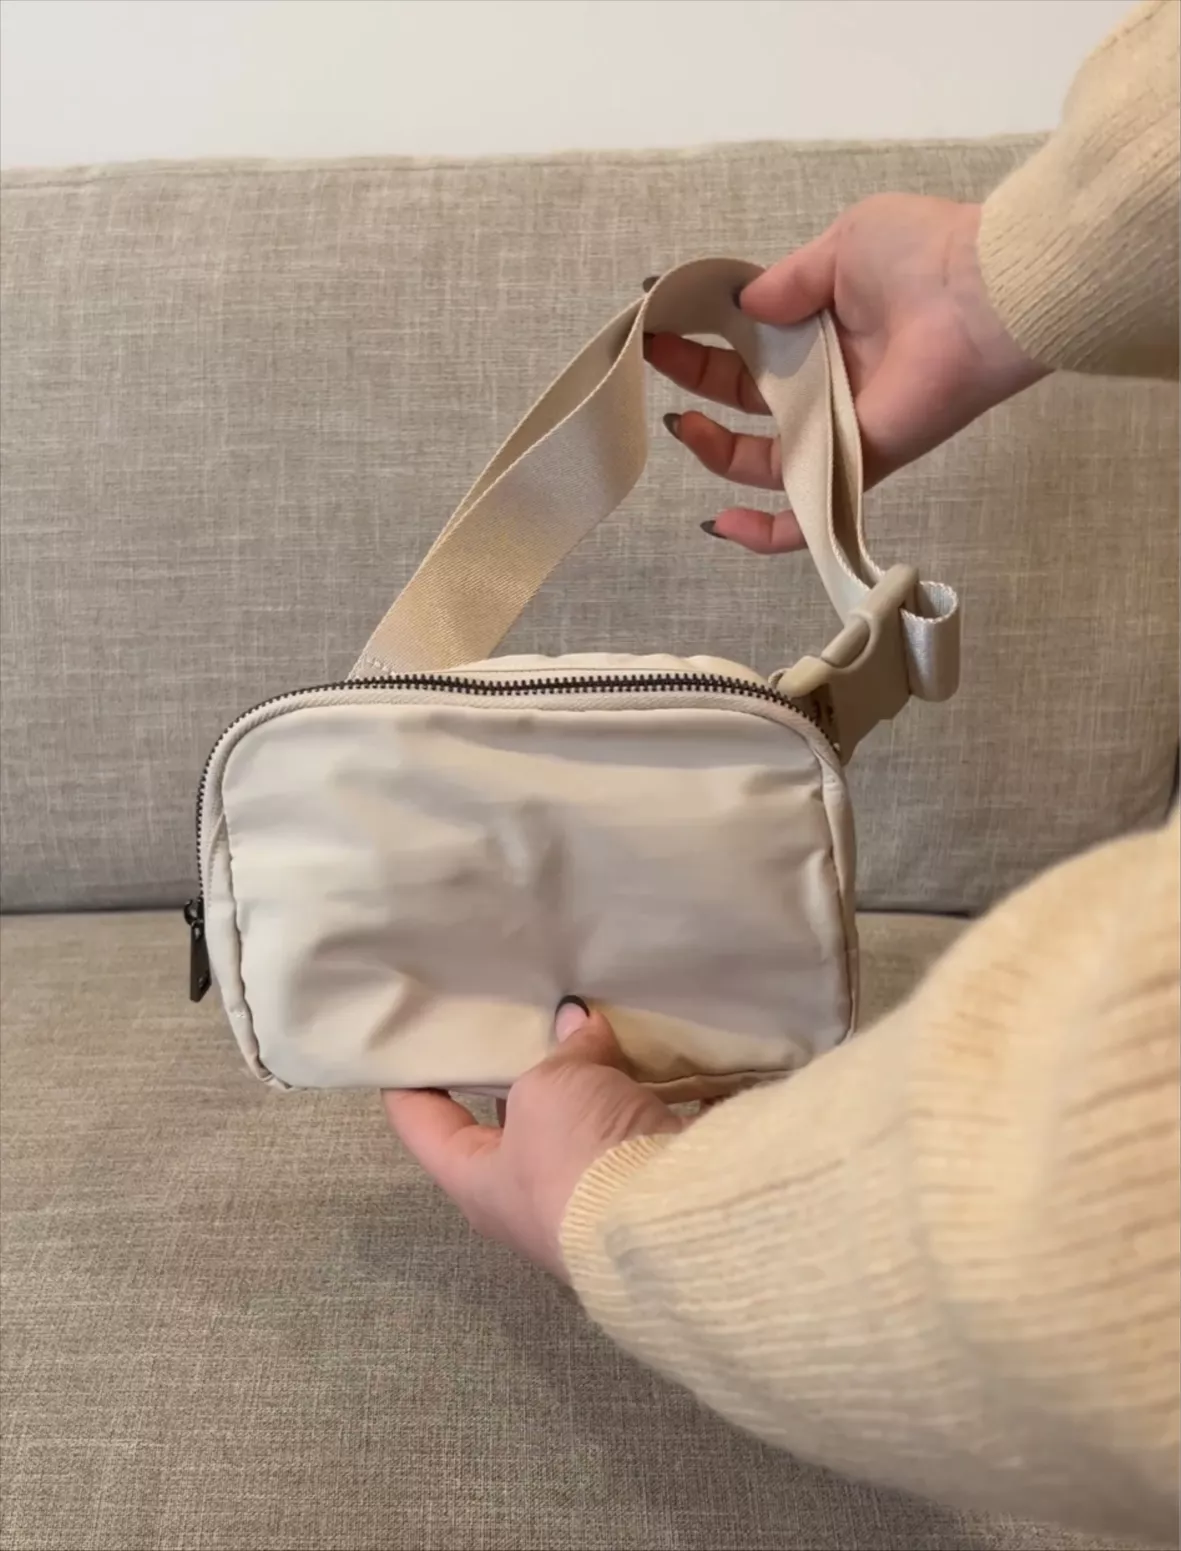 This  Belt Bag is an Affordably Stylish Accessory